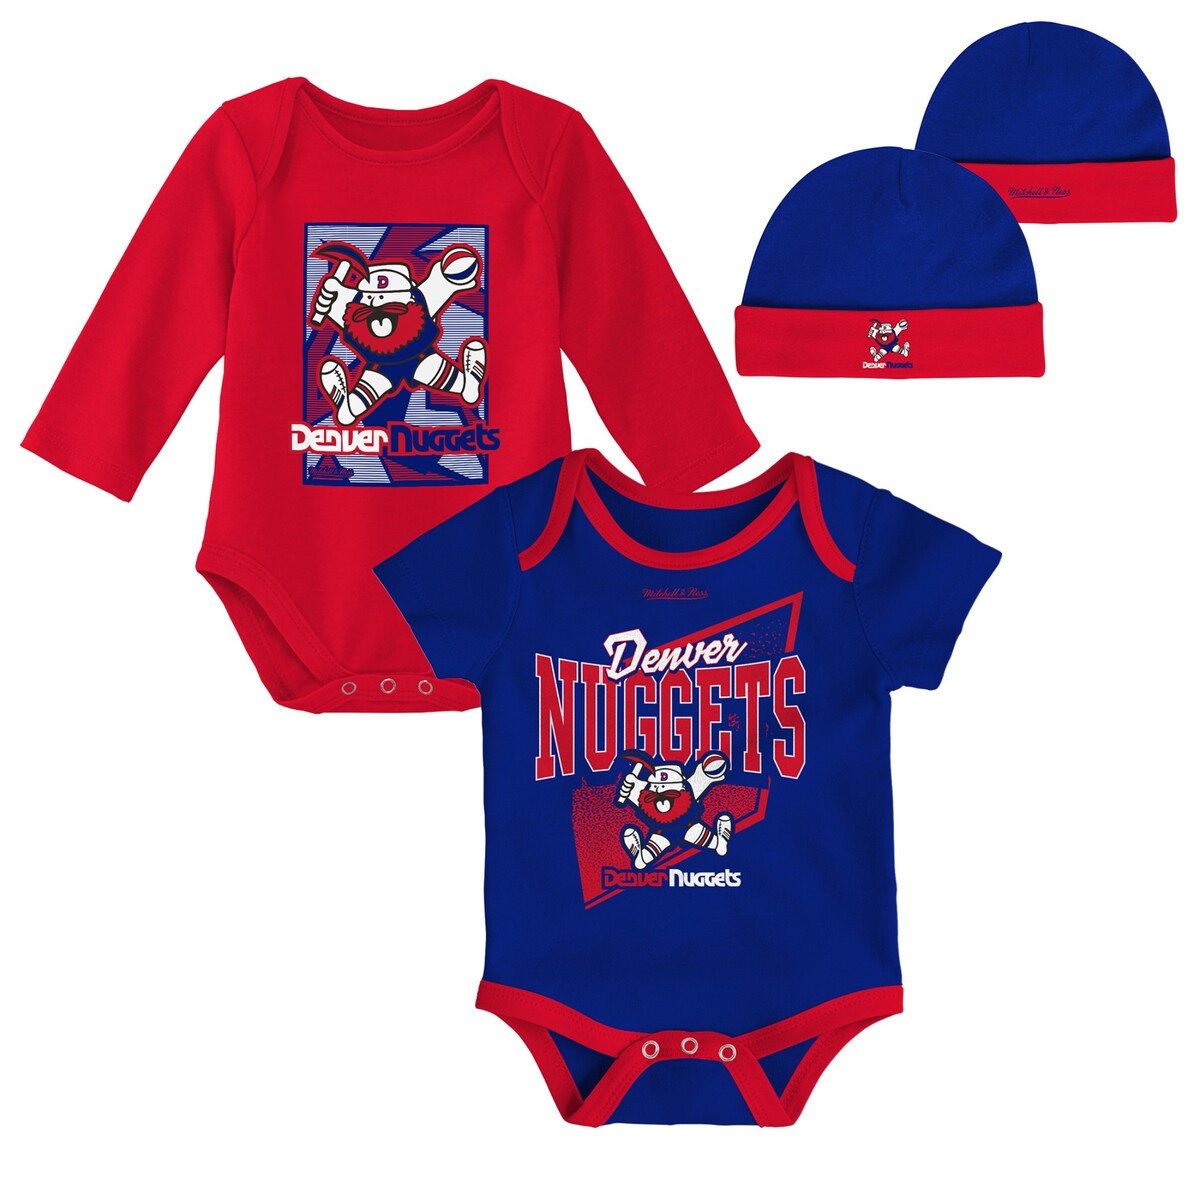 Start building your little one's collection of Denver Nuggets gear with this bodysuits and cuffed knit hat set from Mitchell & Ness. Each piece features bold Denver Nuggets graphics, and the knit hat features a classic design that makes it a great grab for added head warmth. The newest member of your family will be more than ready to join the team fan club in any combination of this comfy apparel.Short sleeveLong sleeveMachine wash, tumble dry lowOfficially licensedMaterial: 100% CottonSet includes two bodysuits and one hatThree snaps at bottomImportedScreen print graphicsLap shoulder necklineCuffed knit hatBrand: Mitchell & Ness